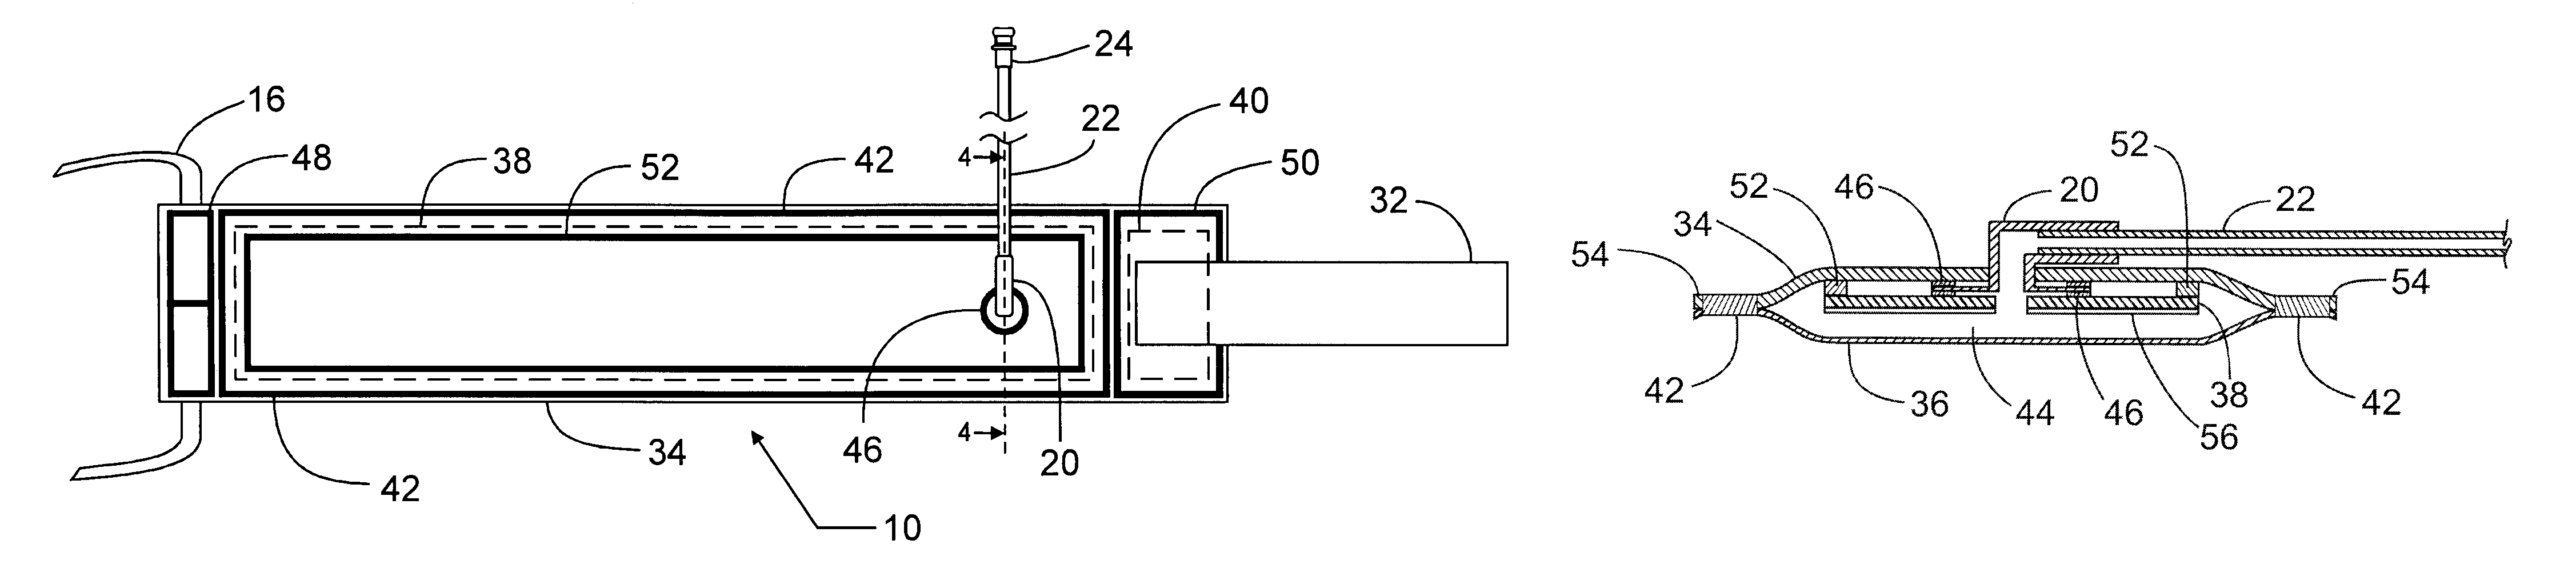 Low-cost disposable tourniquet cuff apparatus and method